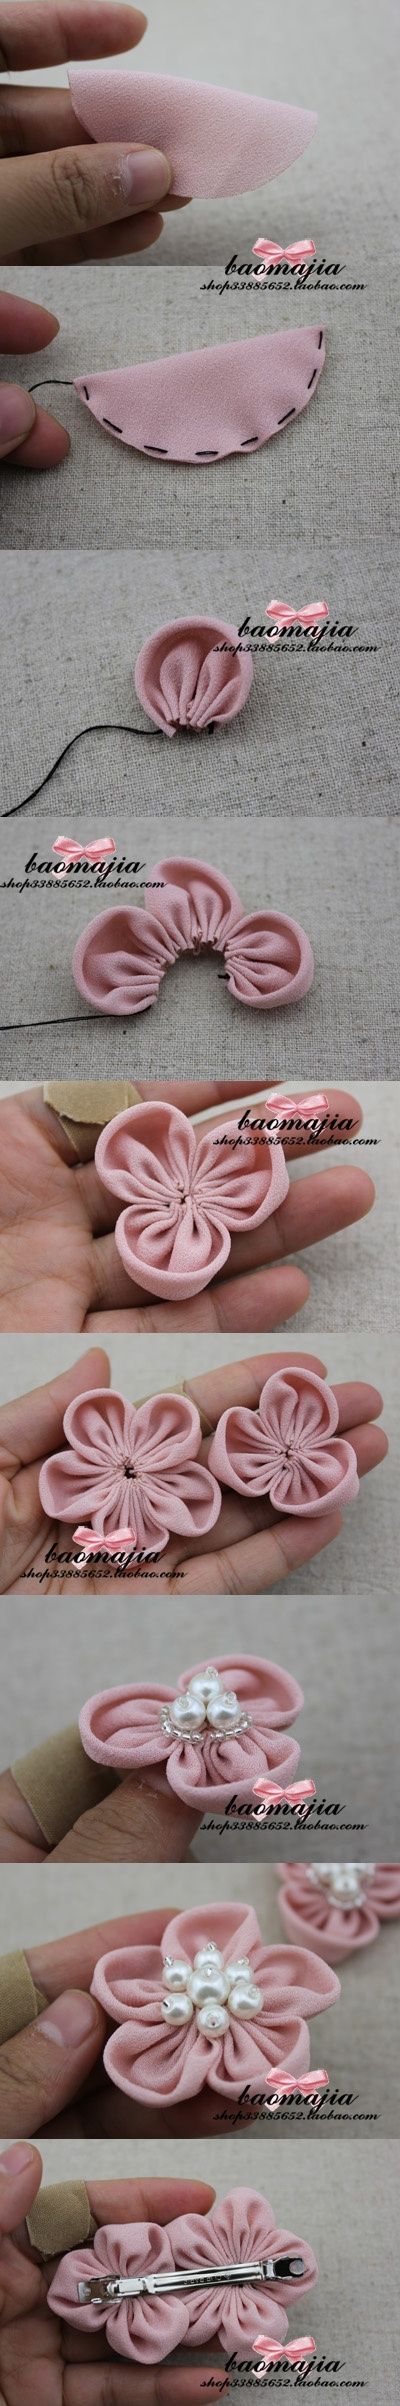 Cute and easy DIY fabric flower pins